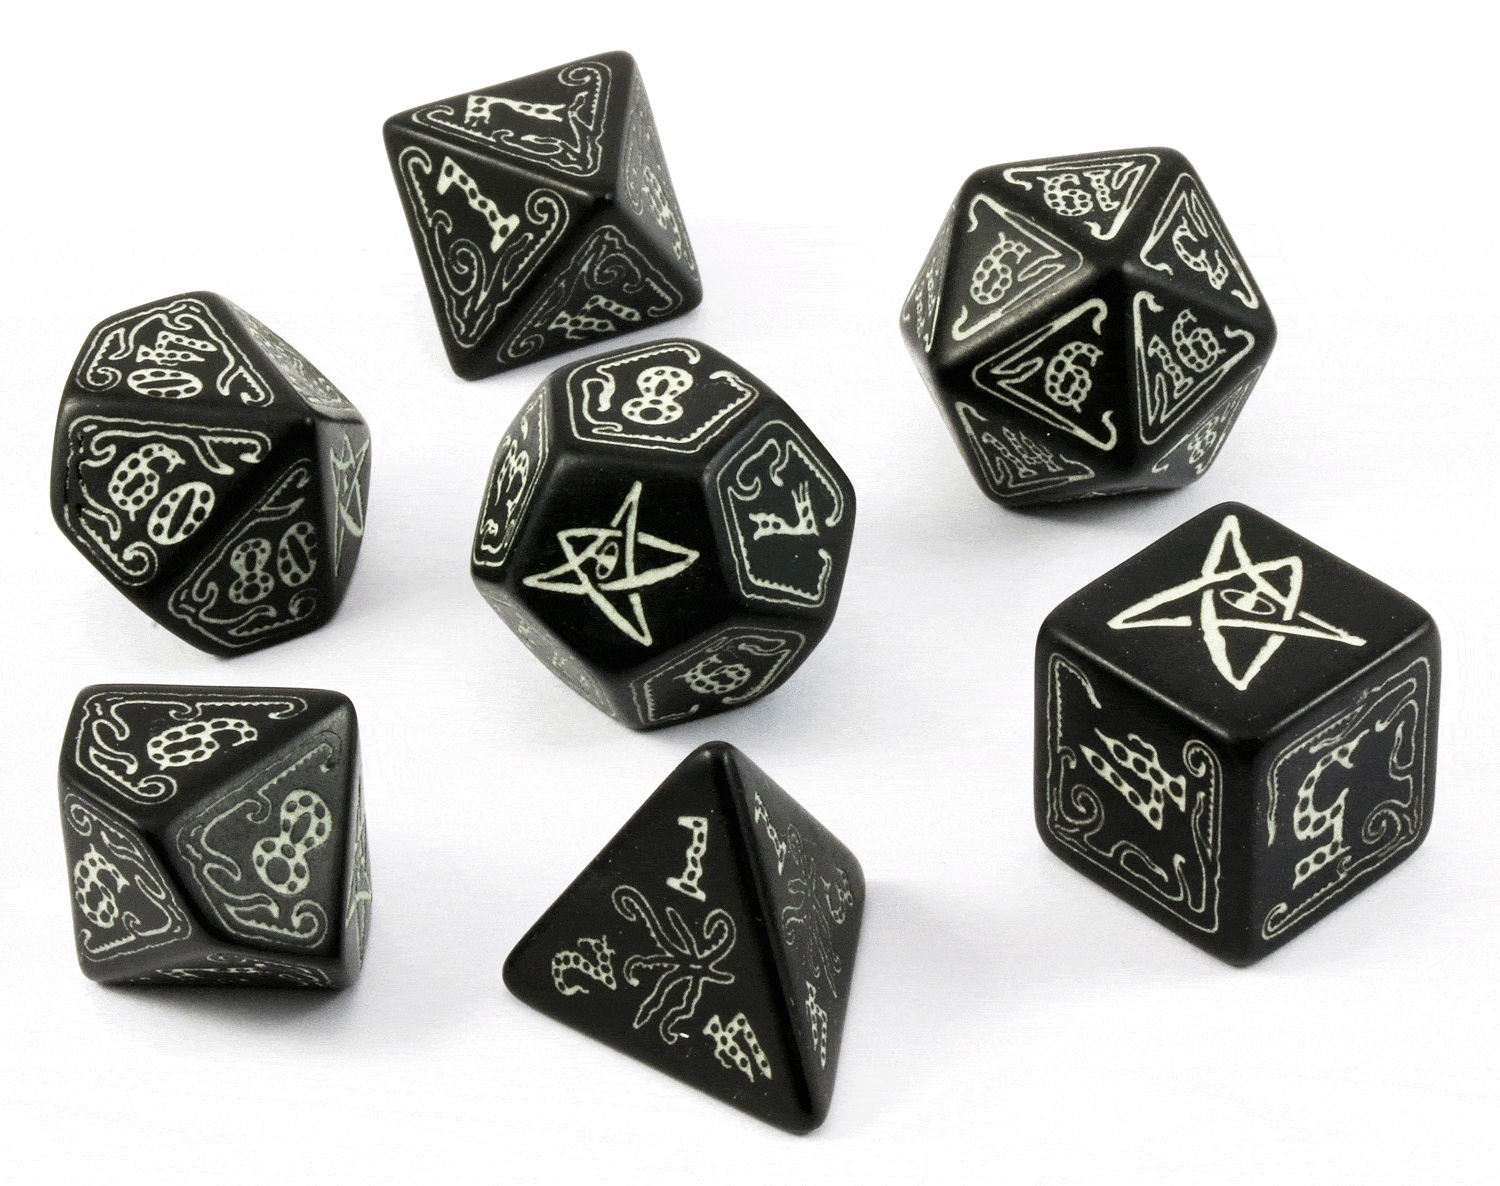 Call Of Cthulhu Dice Black Glow In The Dark Rpg Role Playing Game Dark Elf Dice